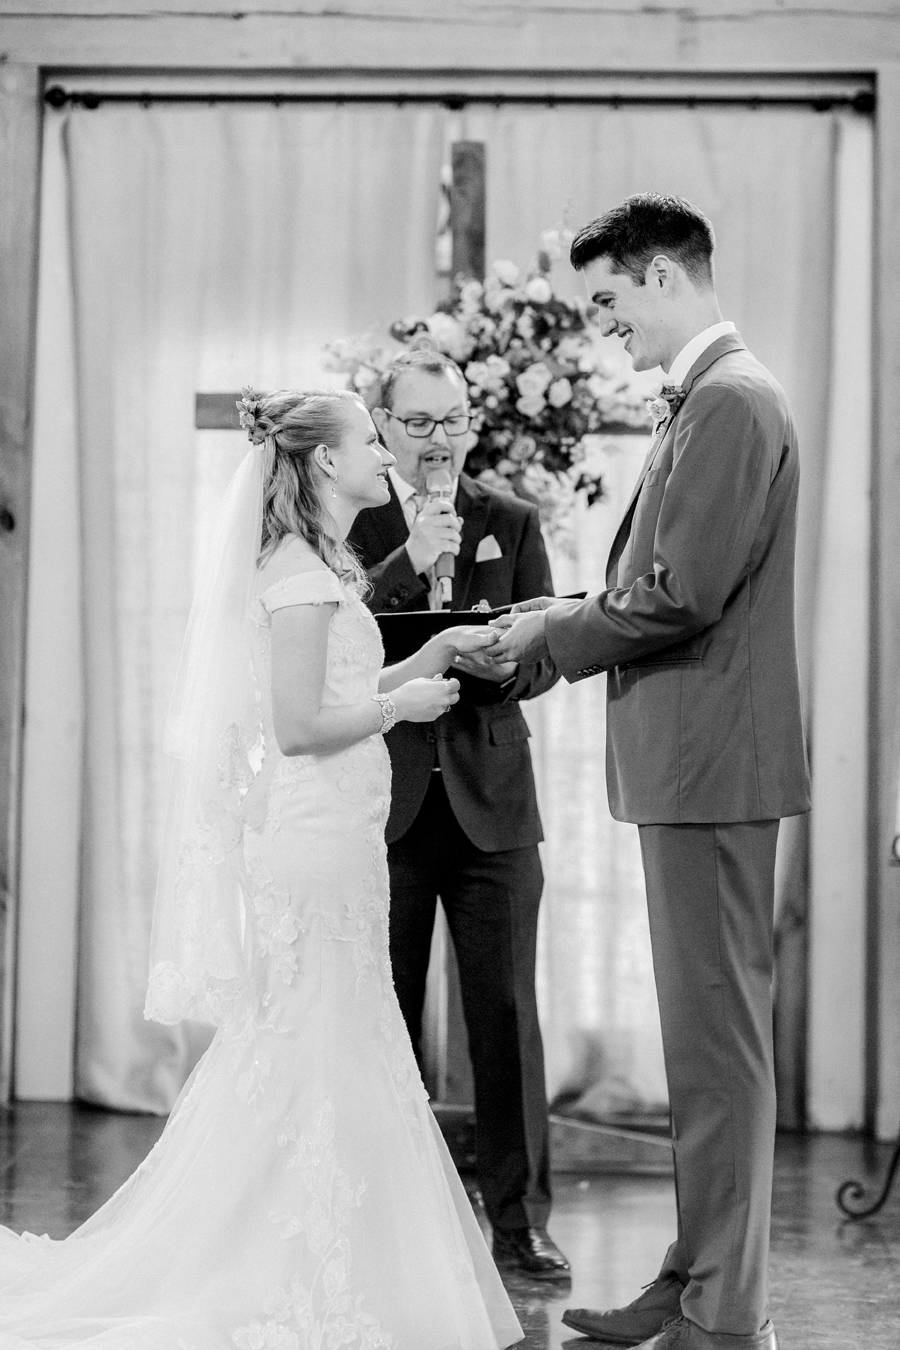 The bride and groom exchange vows at a Blue Bell Farm wedding by Love Tree Studios.